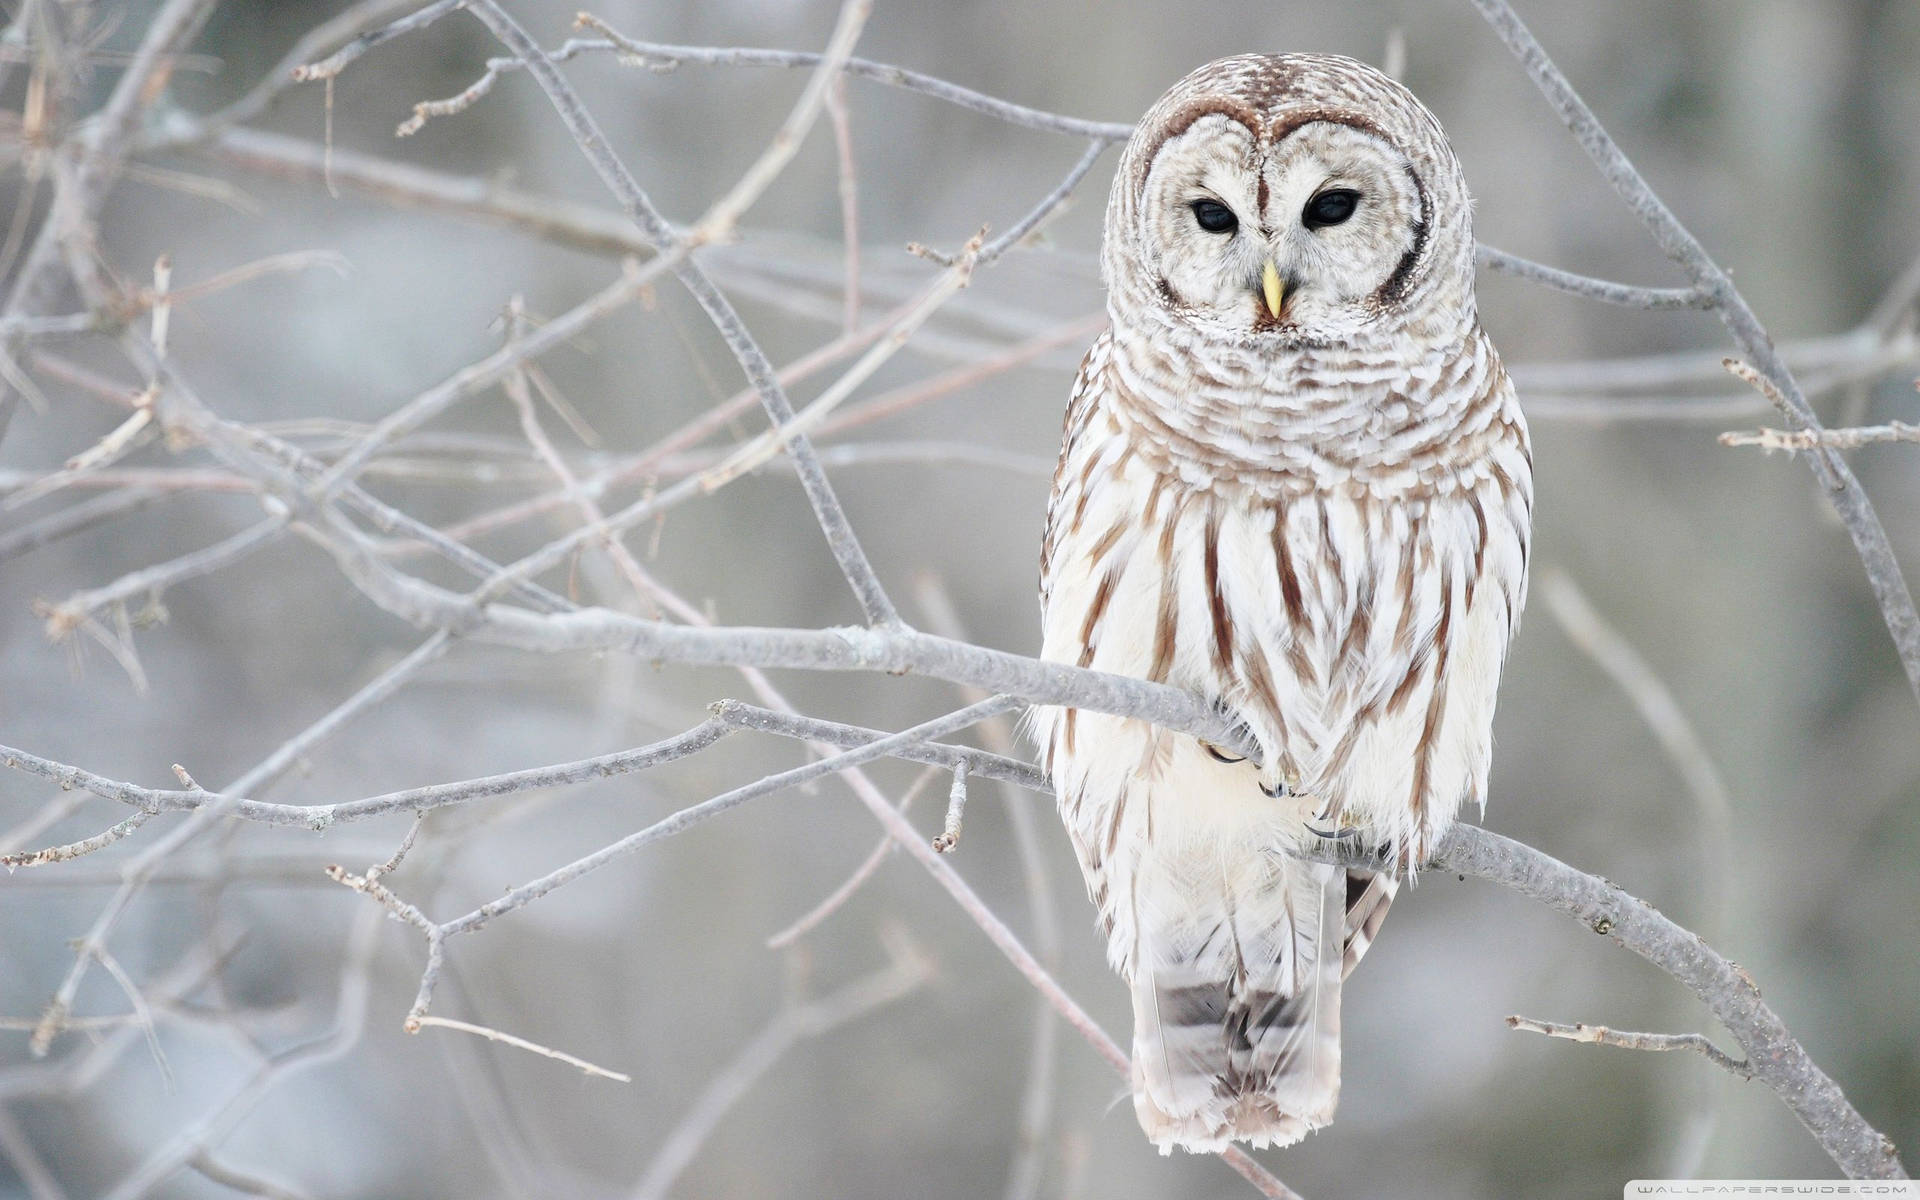 White Barred Owl Snowy Branches Wallpaper